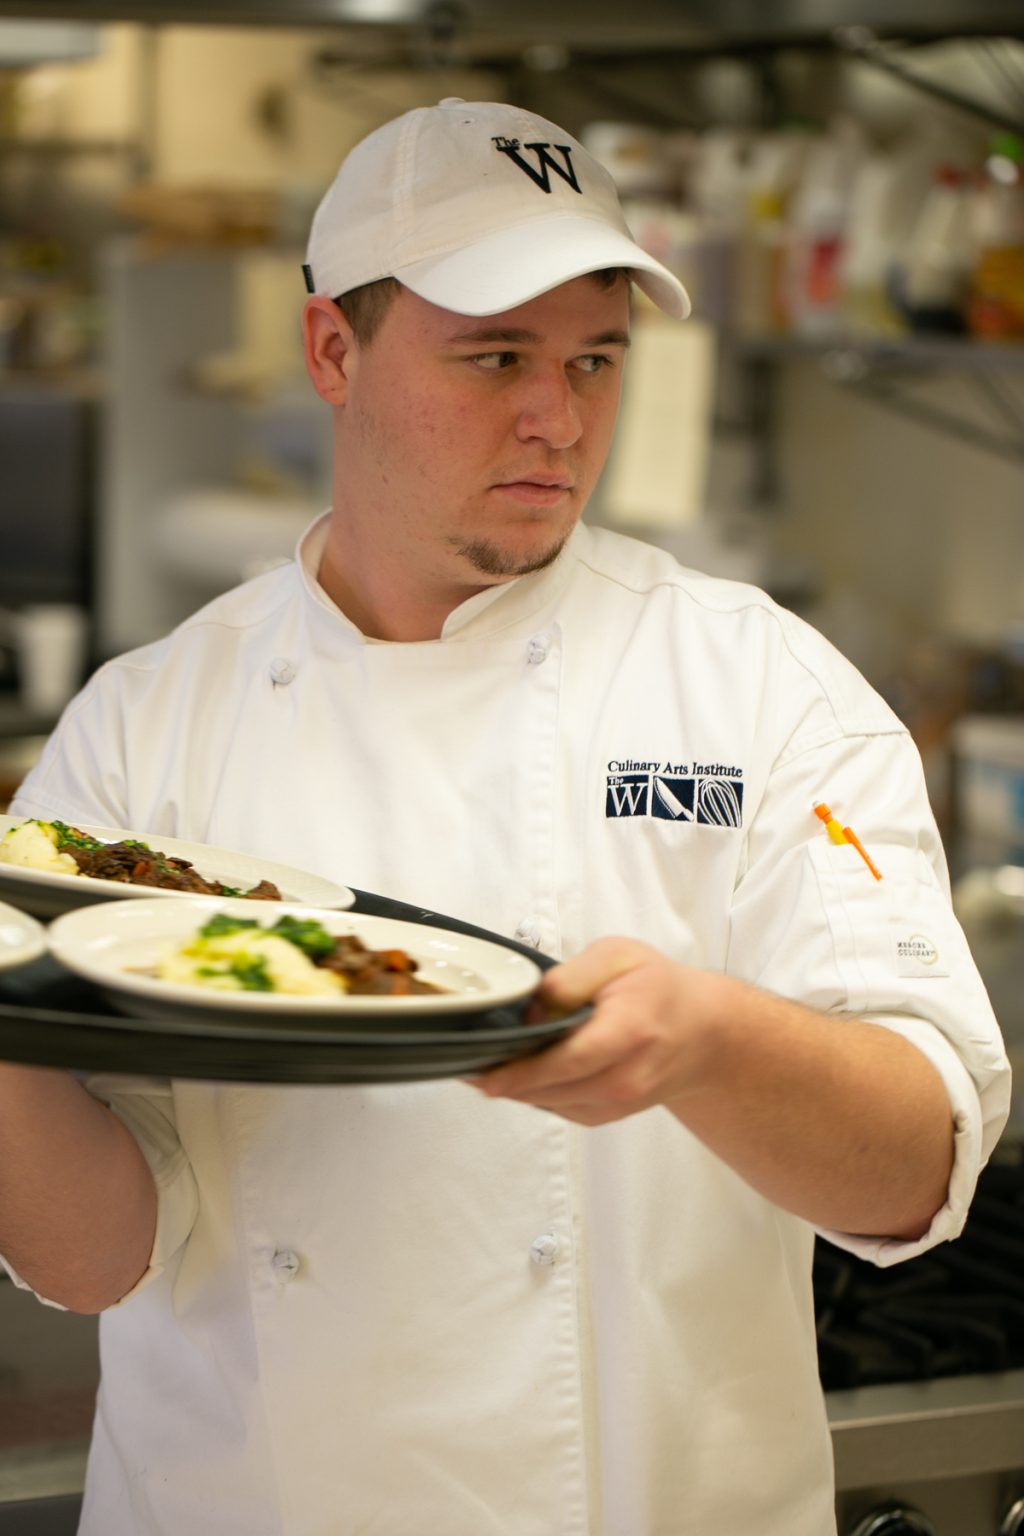 A male student chef carries a tray of plates